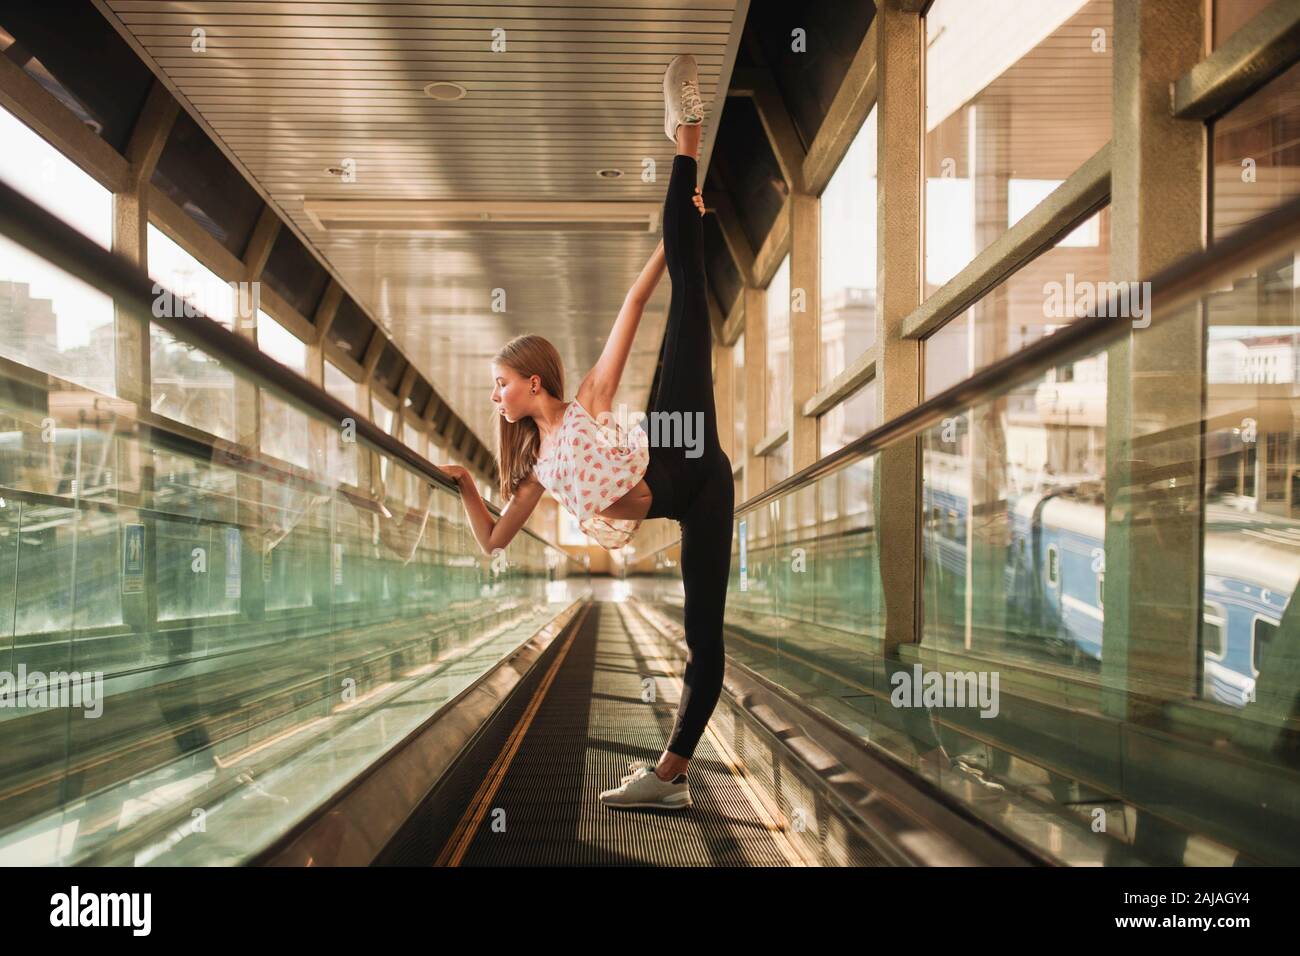 woman ballerina stands in a tunnel lifting her leg high Stock Photo